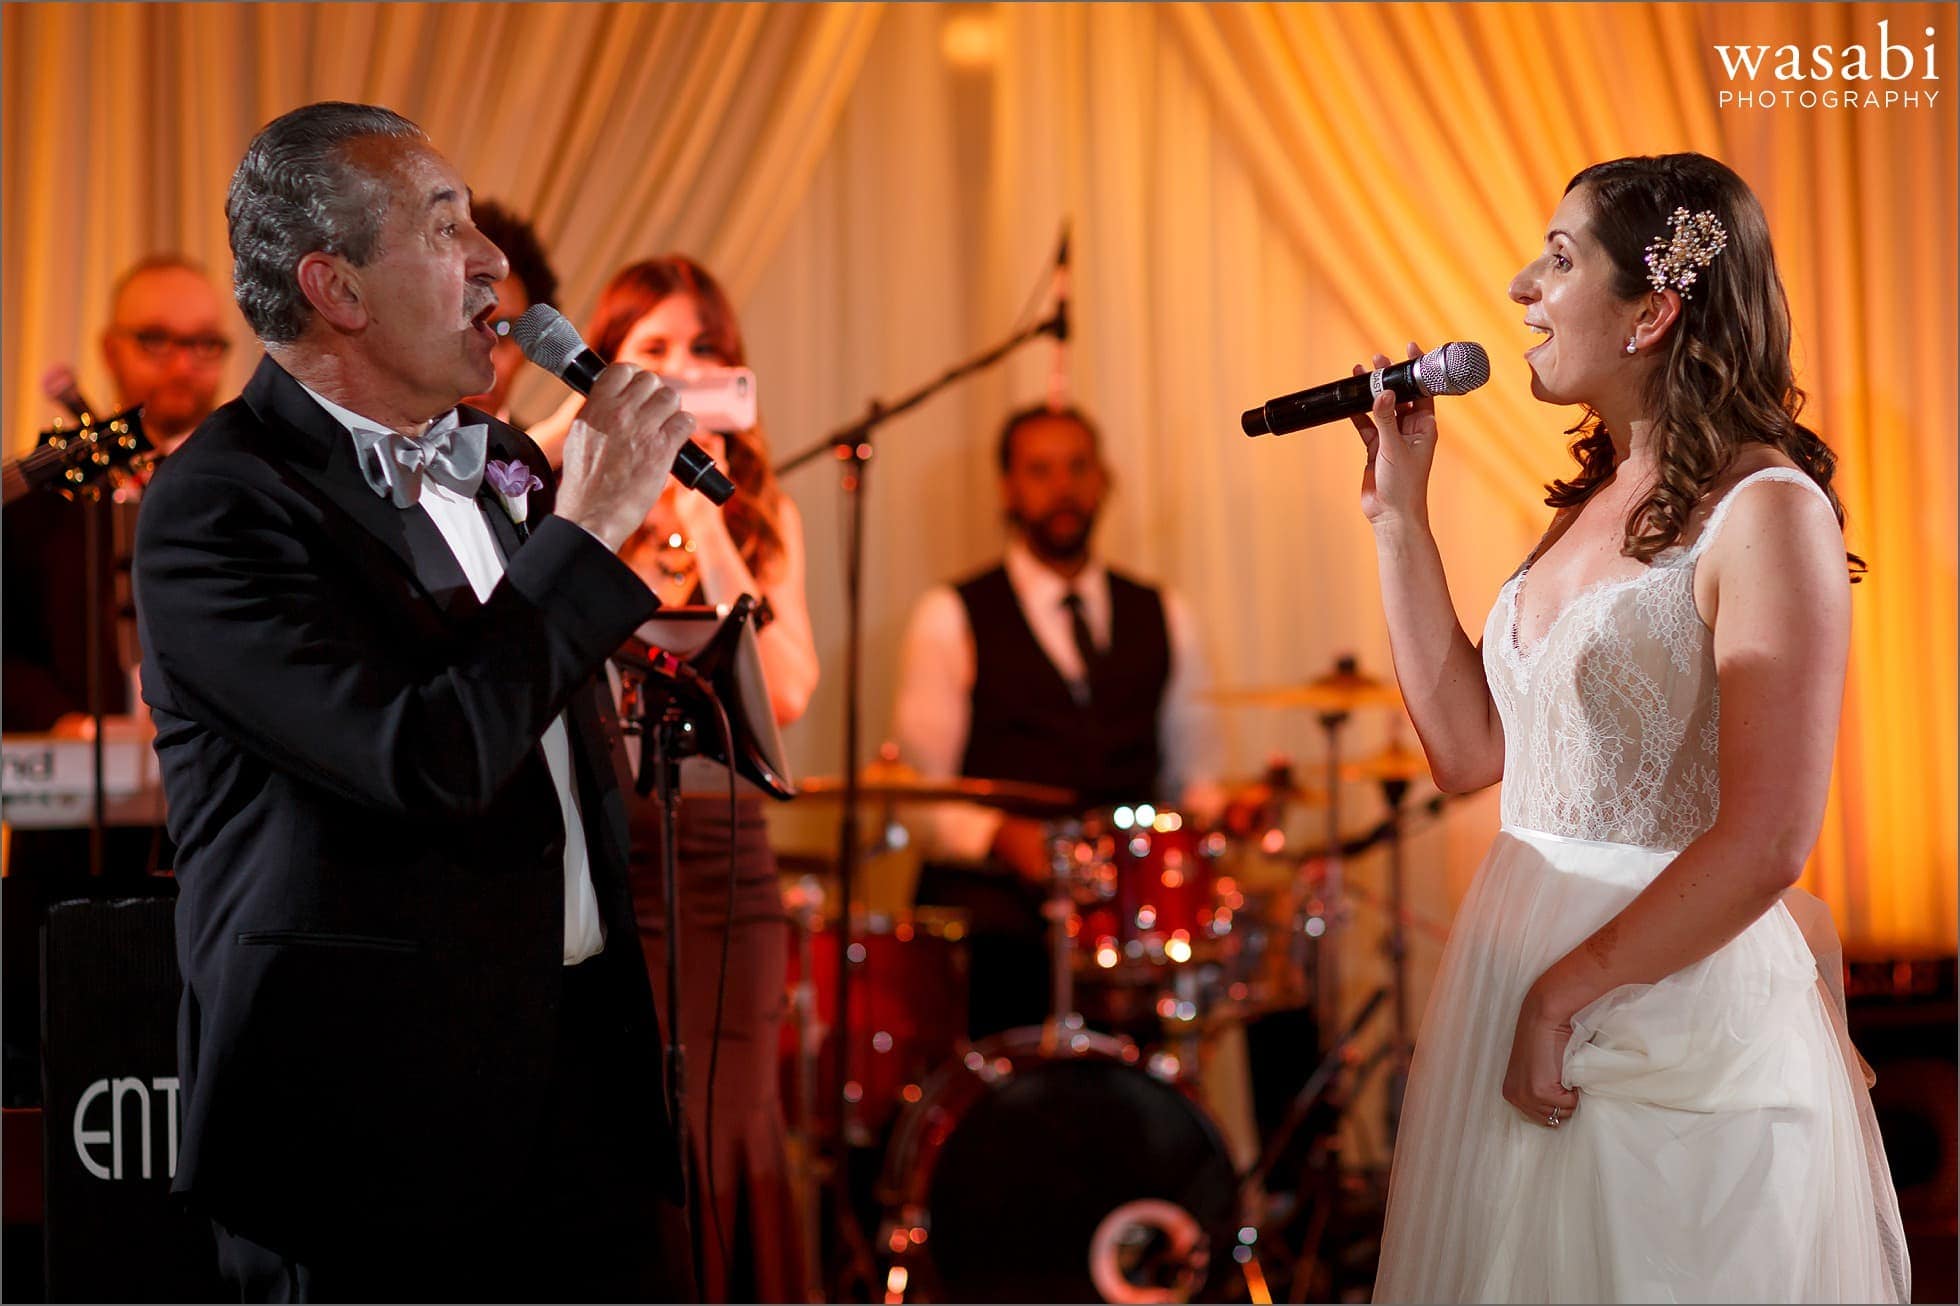 groom and father sing a duet for their first dance during wedding reception at The Rookery Building in Chicago